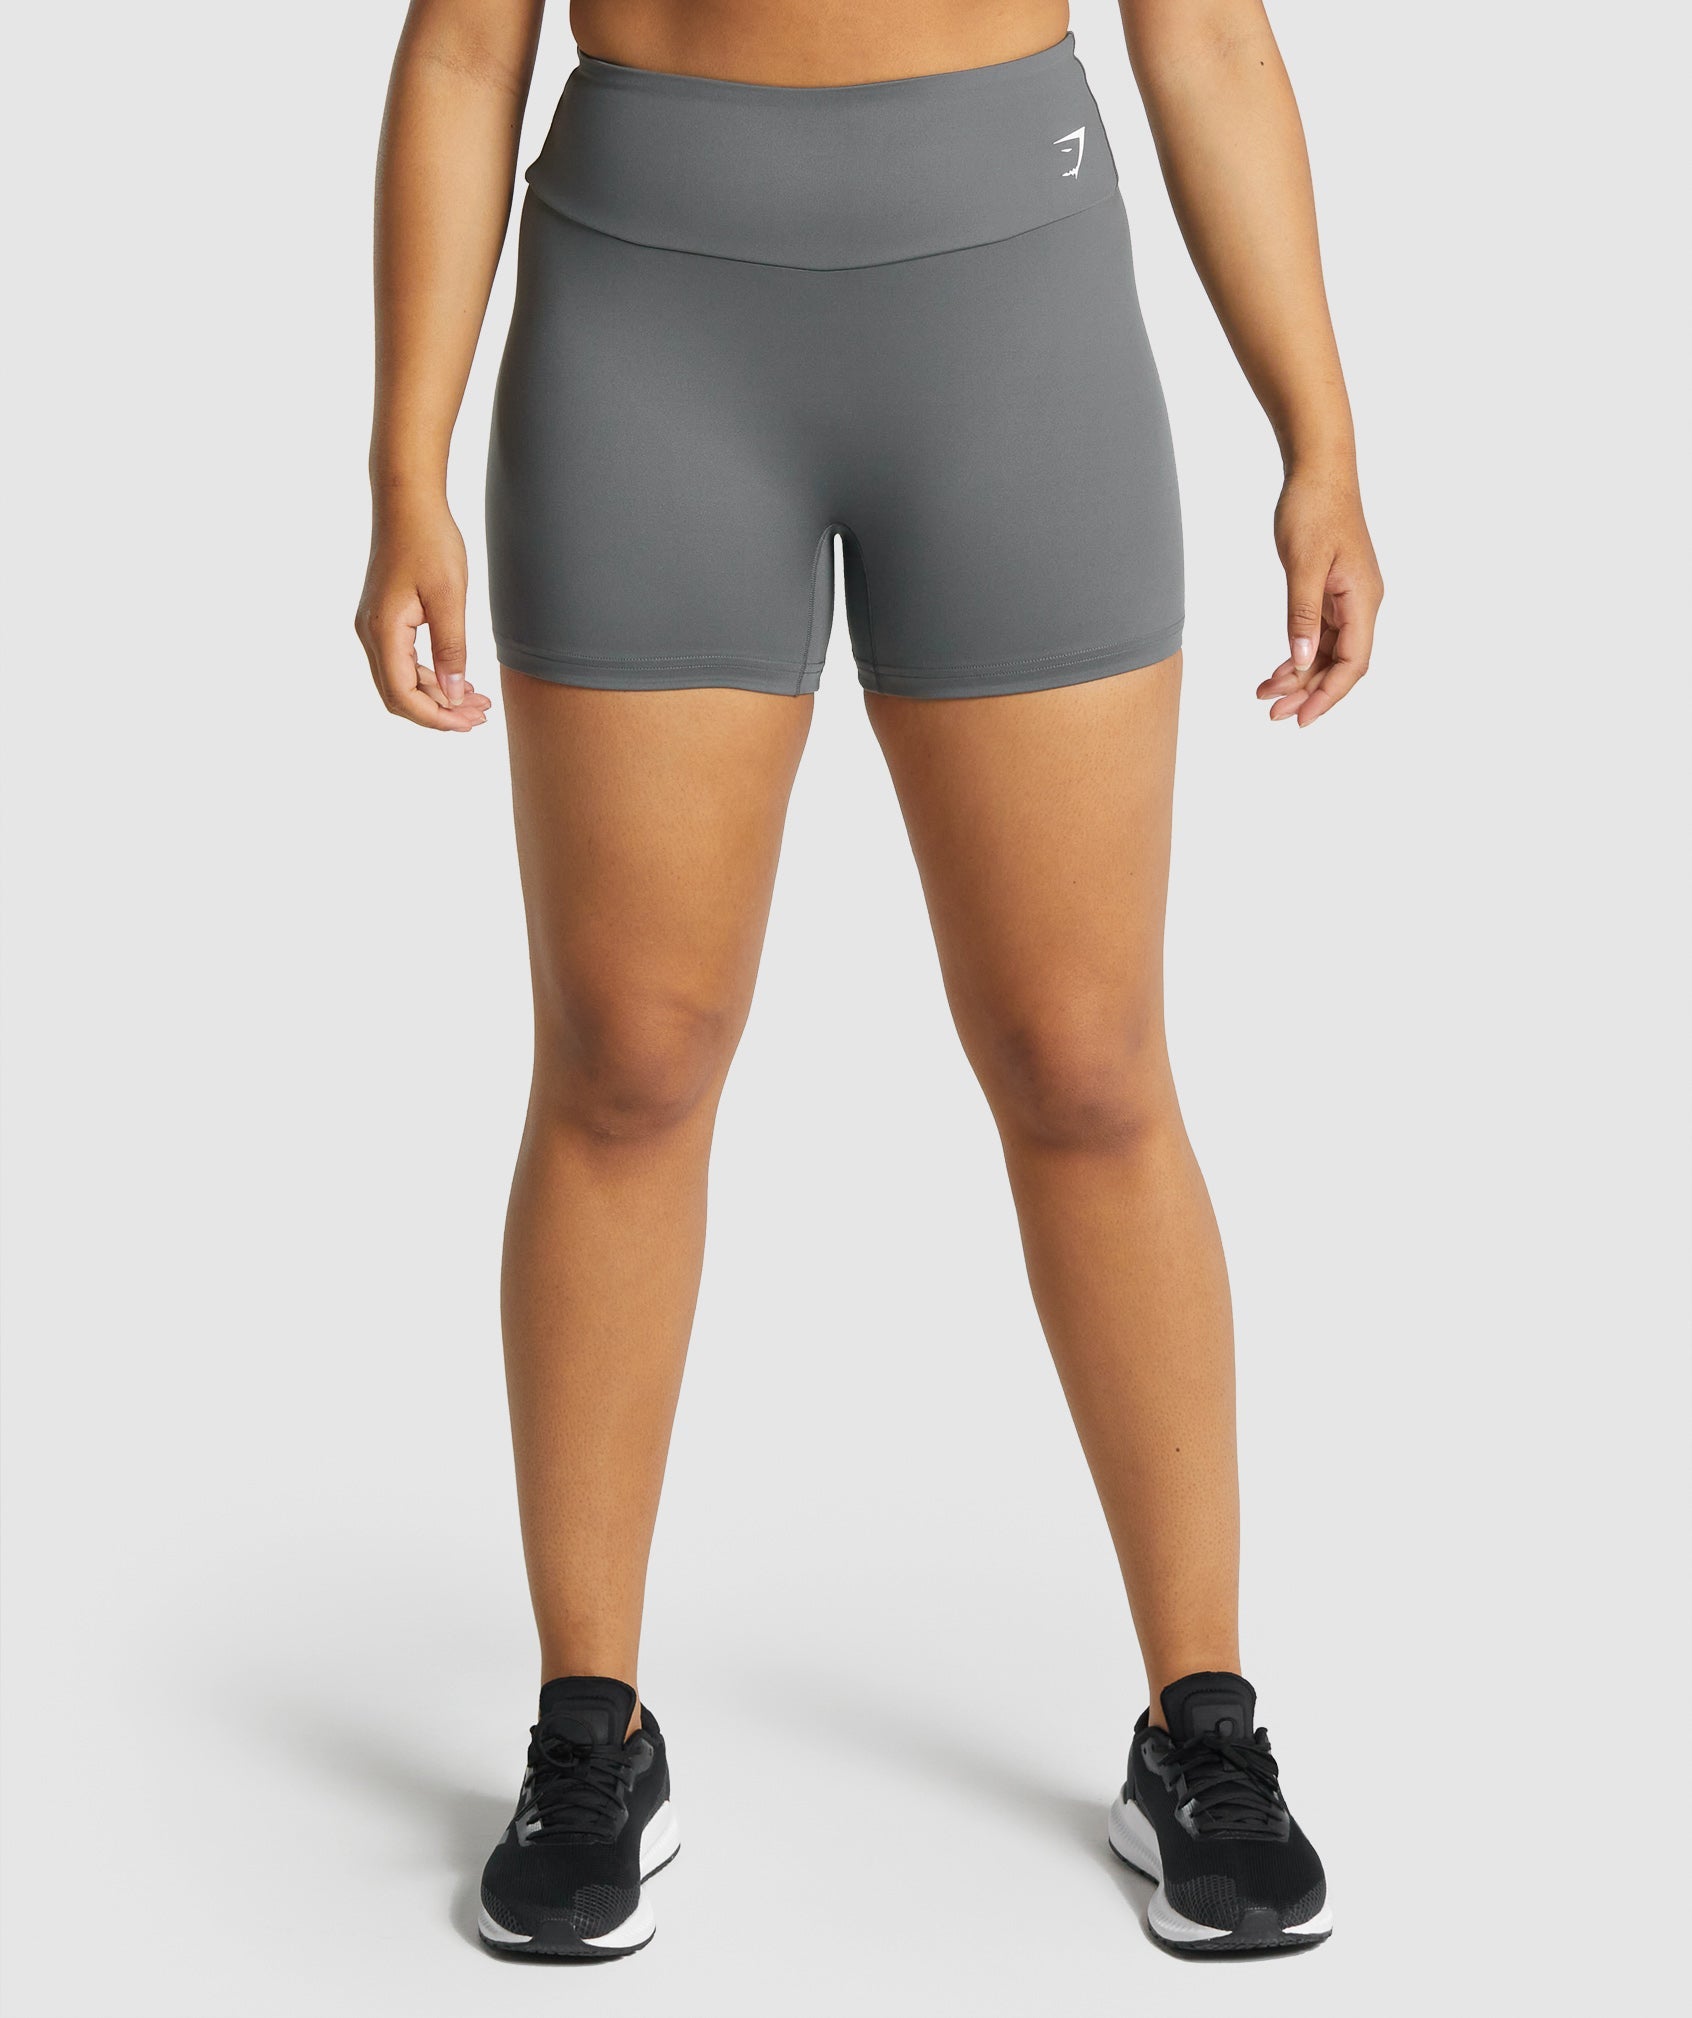 Training Shorts in Charcoal Grey